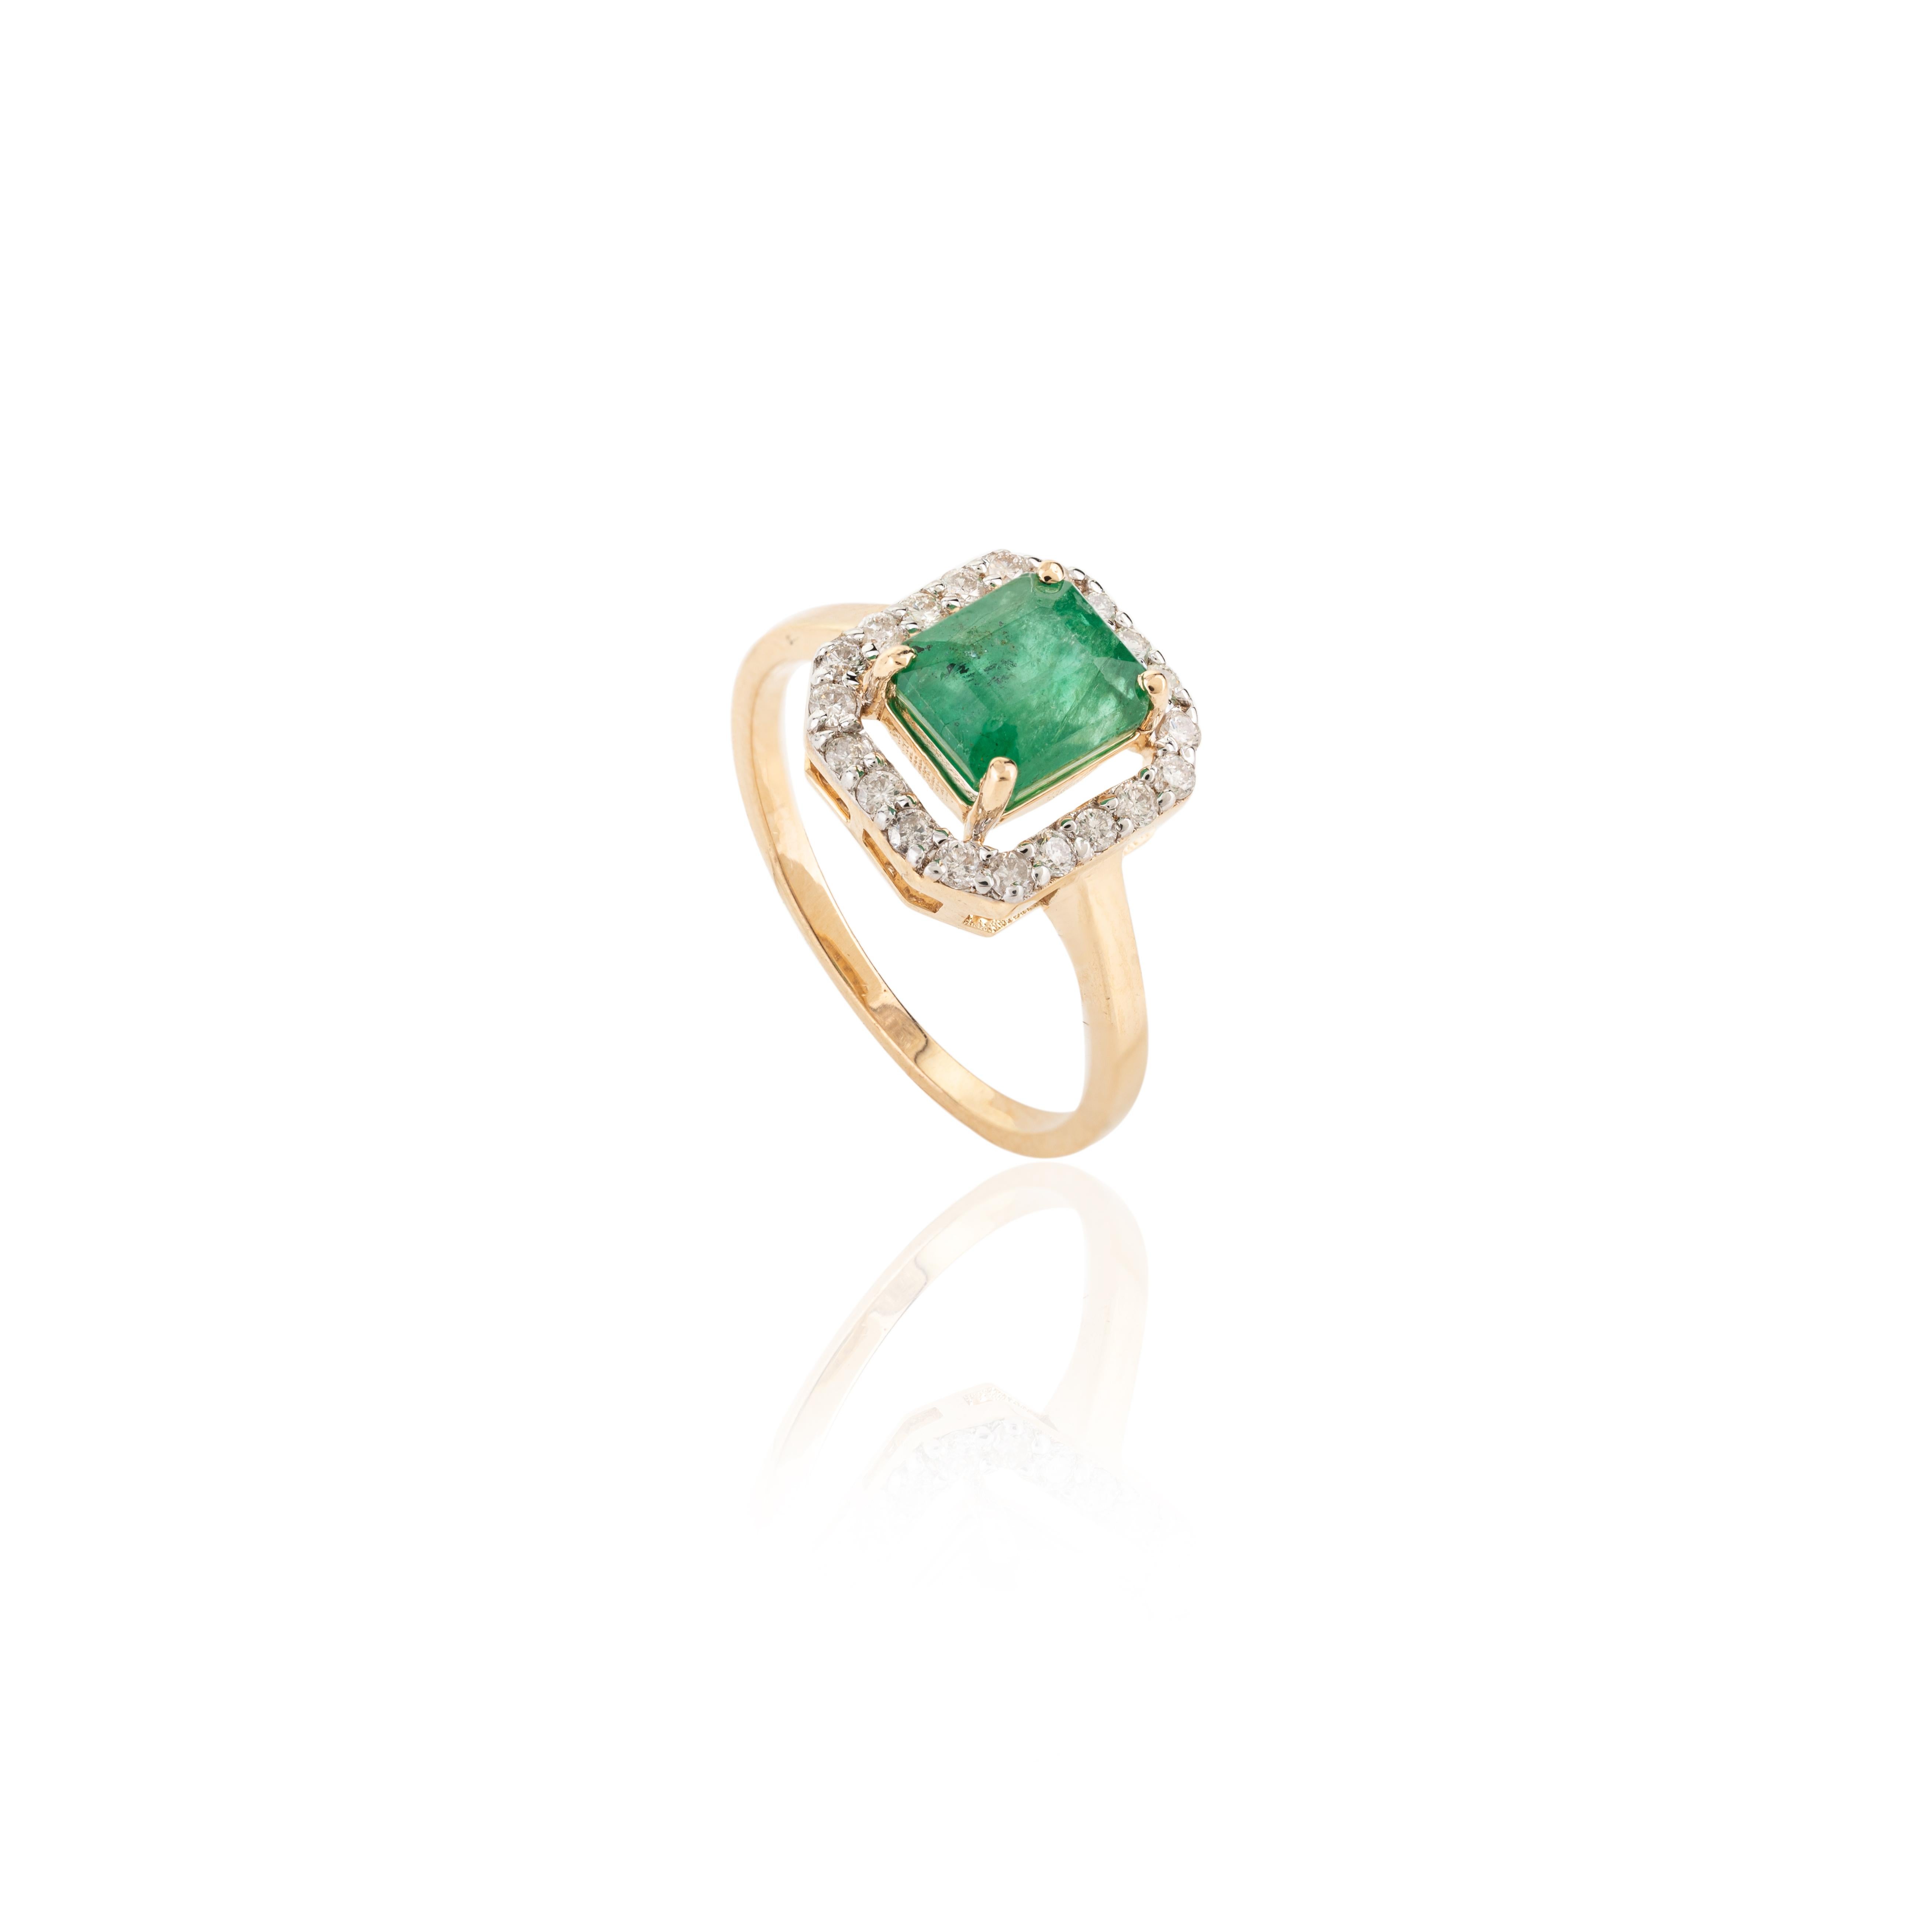 For Sale:  1.5 Carat Octagon Emerald Halo Diamond Engagement Ring in 18k Yellow Gold 8